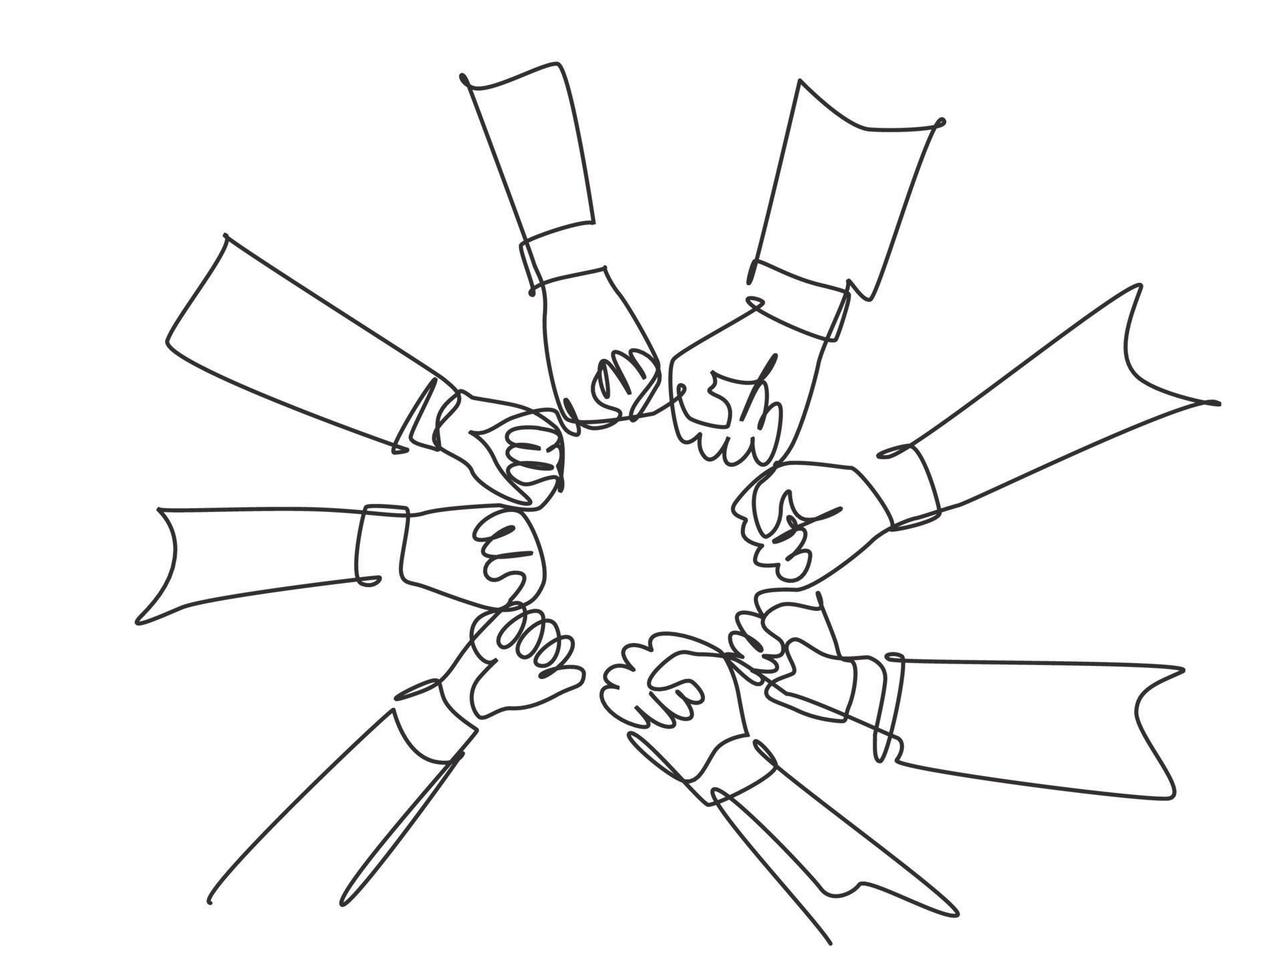 Single continuous line drawing group of young business people unite their hands together to form a circle shape as a unity symbol. Teamwork concept one line draw graphic design vector illustration